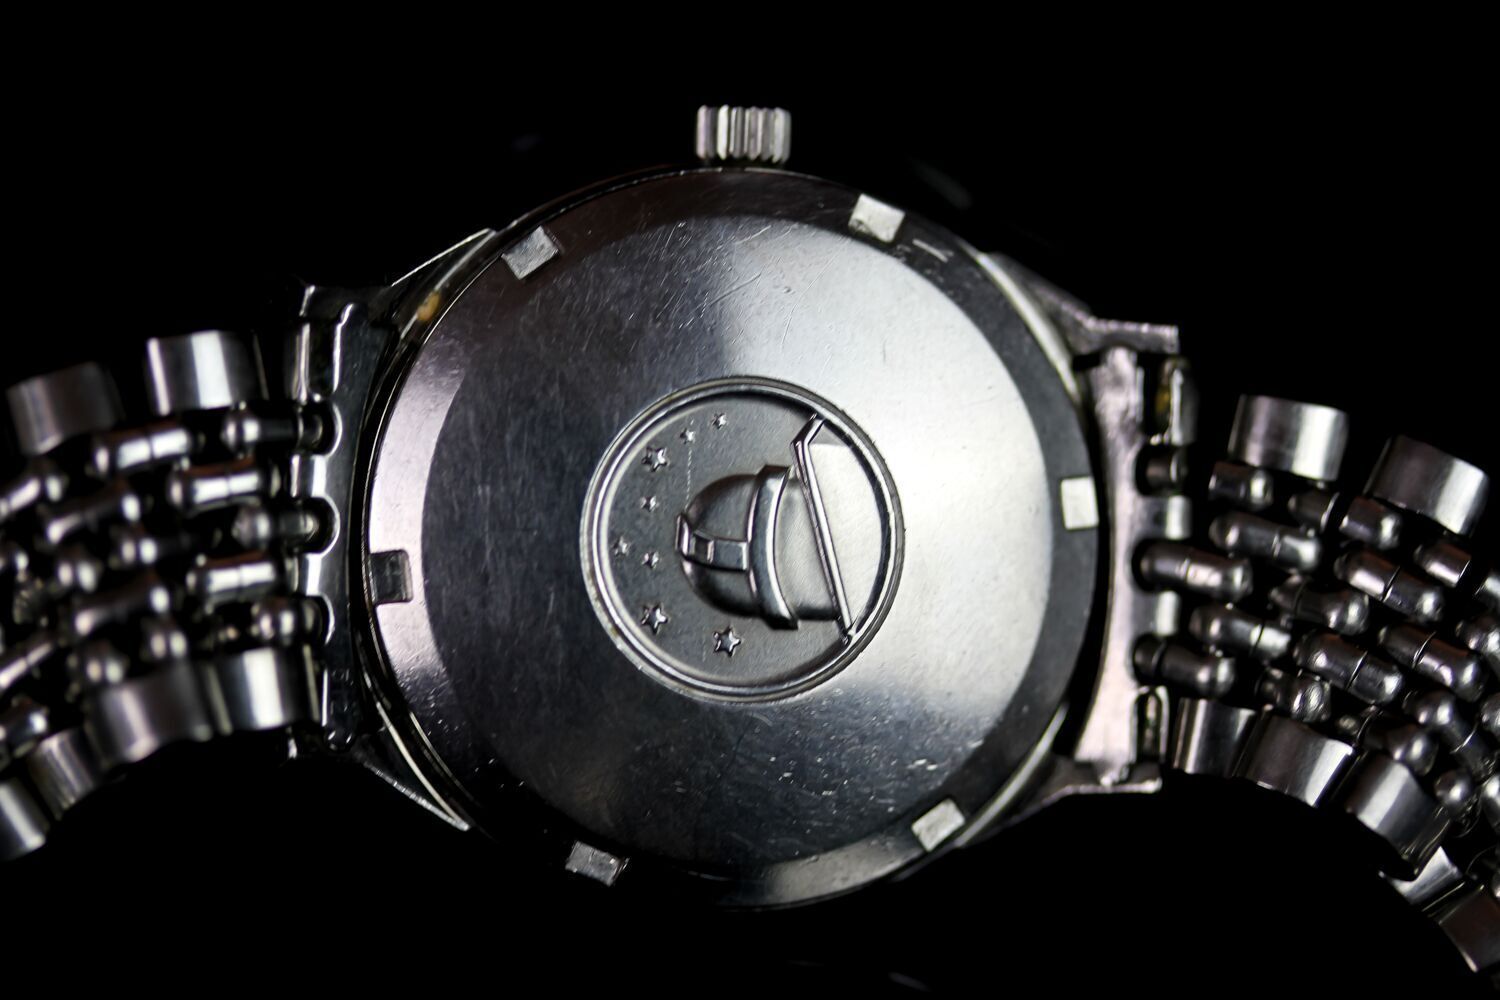 GENTLEMENS OMEGA AUTOMATIC CHRONOMETER CONSTELLATION WRISTWATCH REF. 167.005, circular silver dial - Image 3 of 3